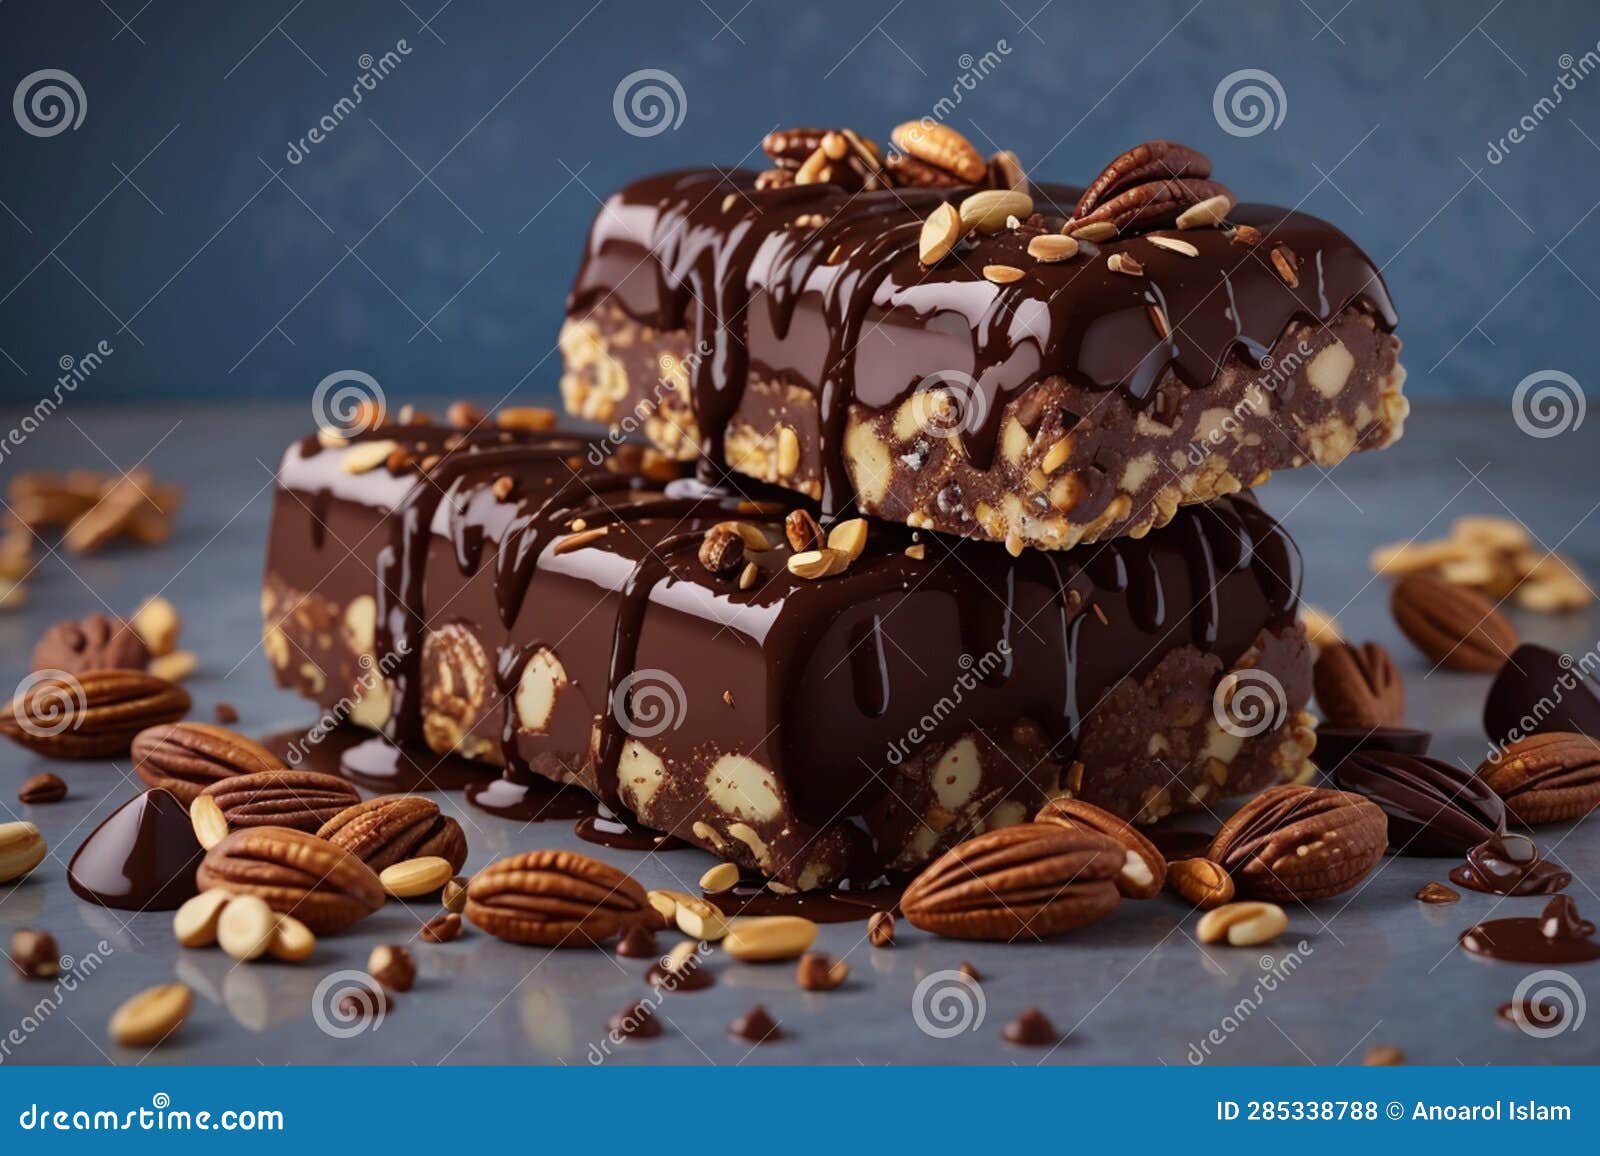 Chocolate Dipped Ice Cream Bars with Nuts Stock Illustration ...